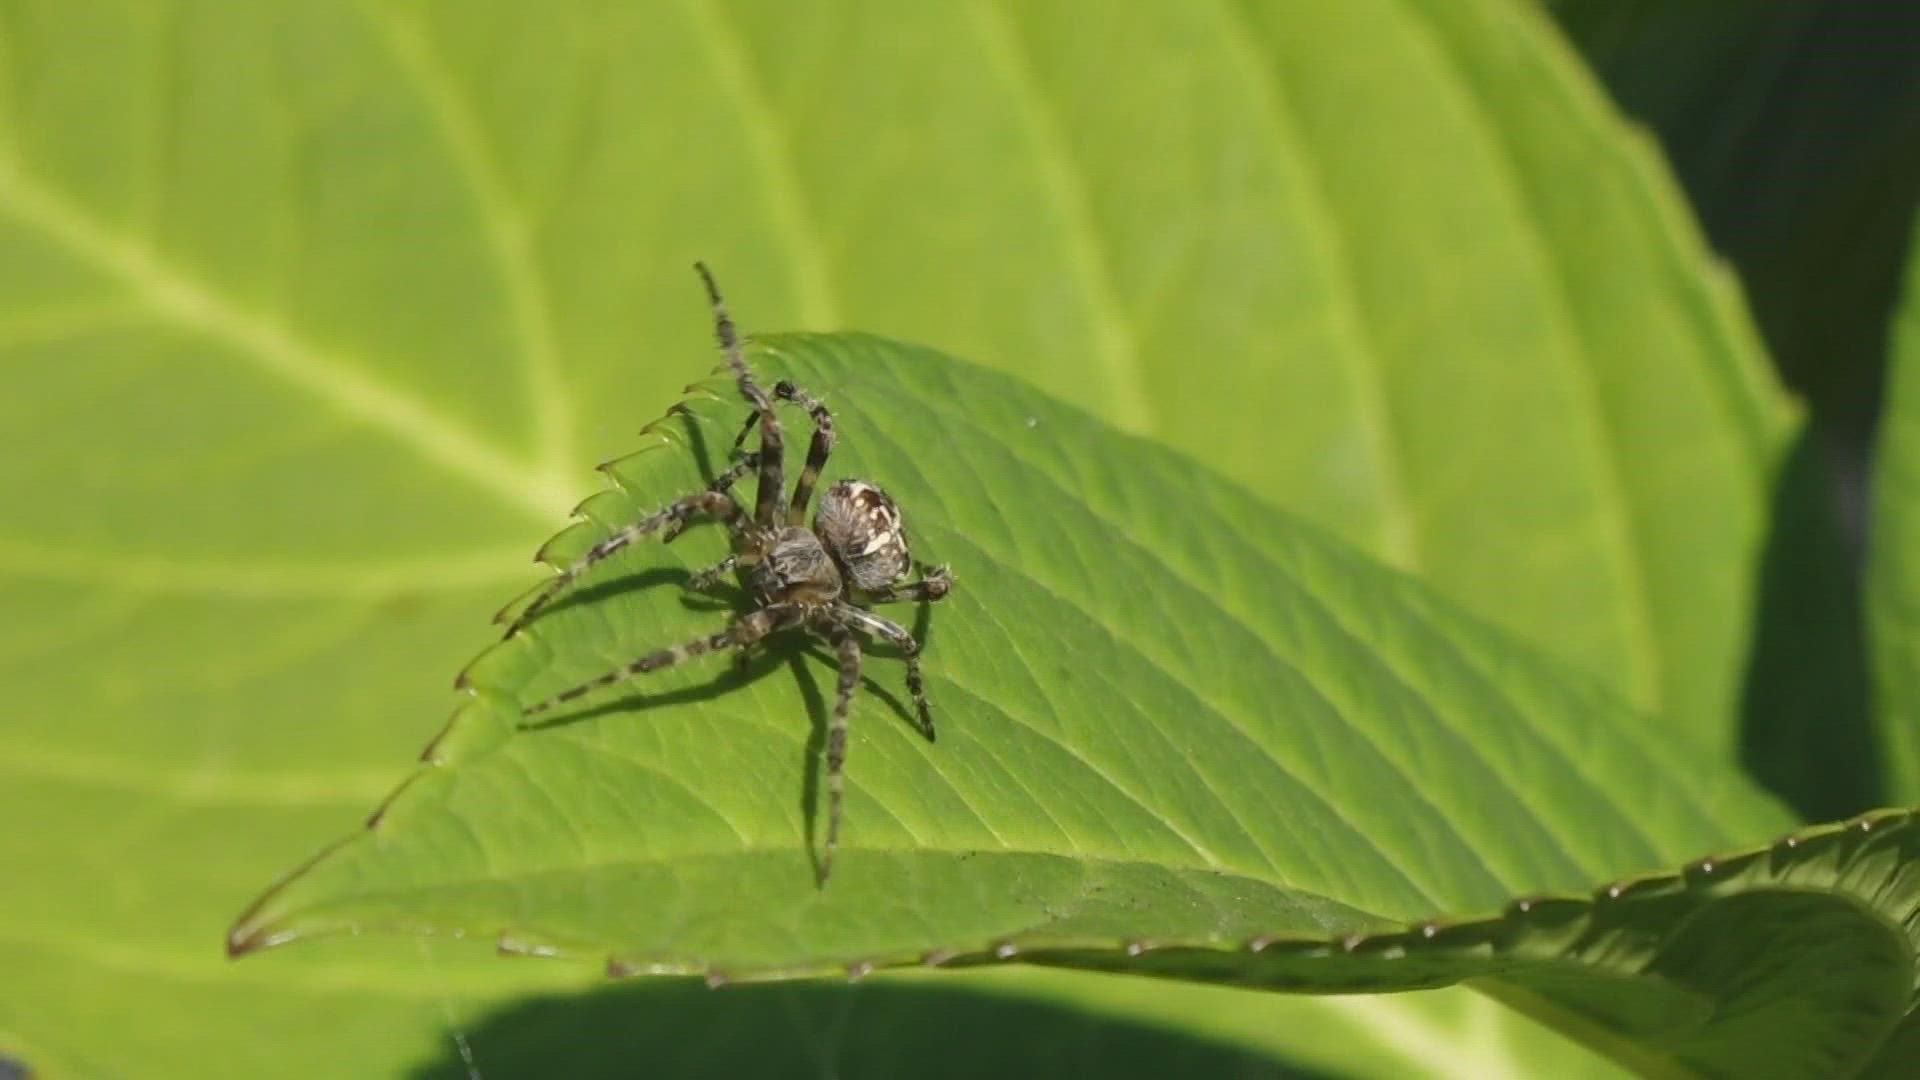 They might look scary, but experts say no spider in the Puget Sound area are dangerous to humans.